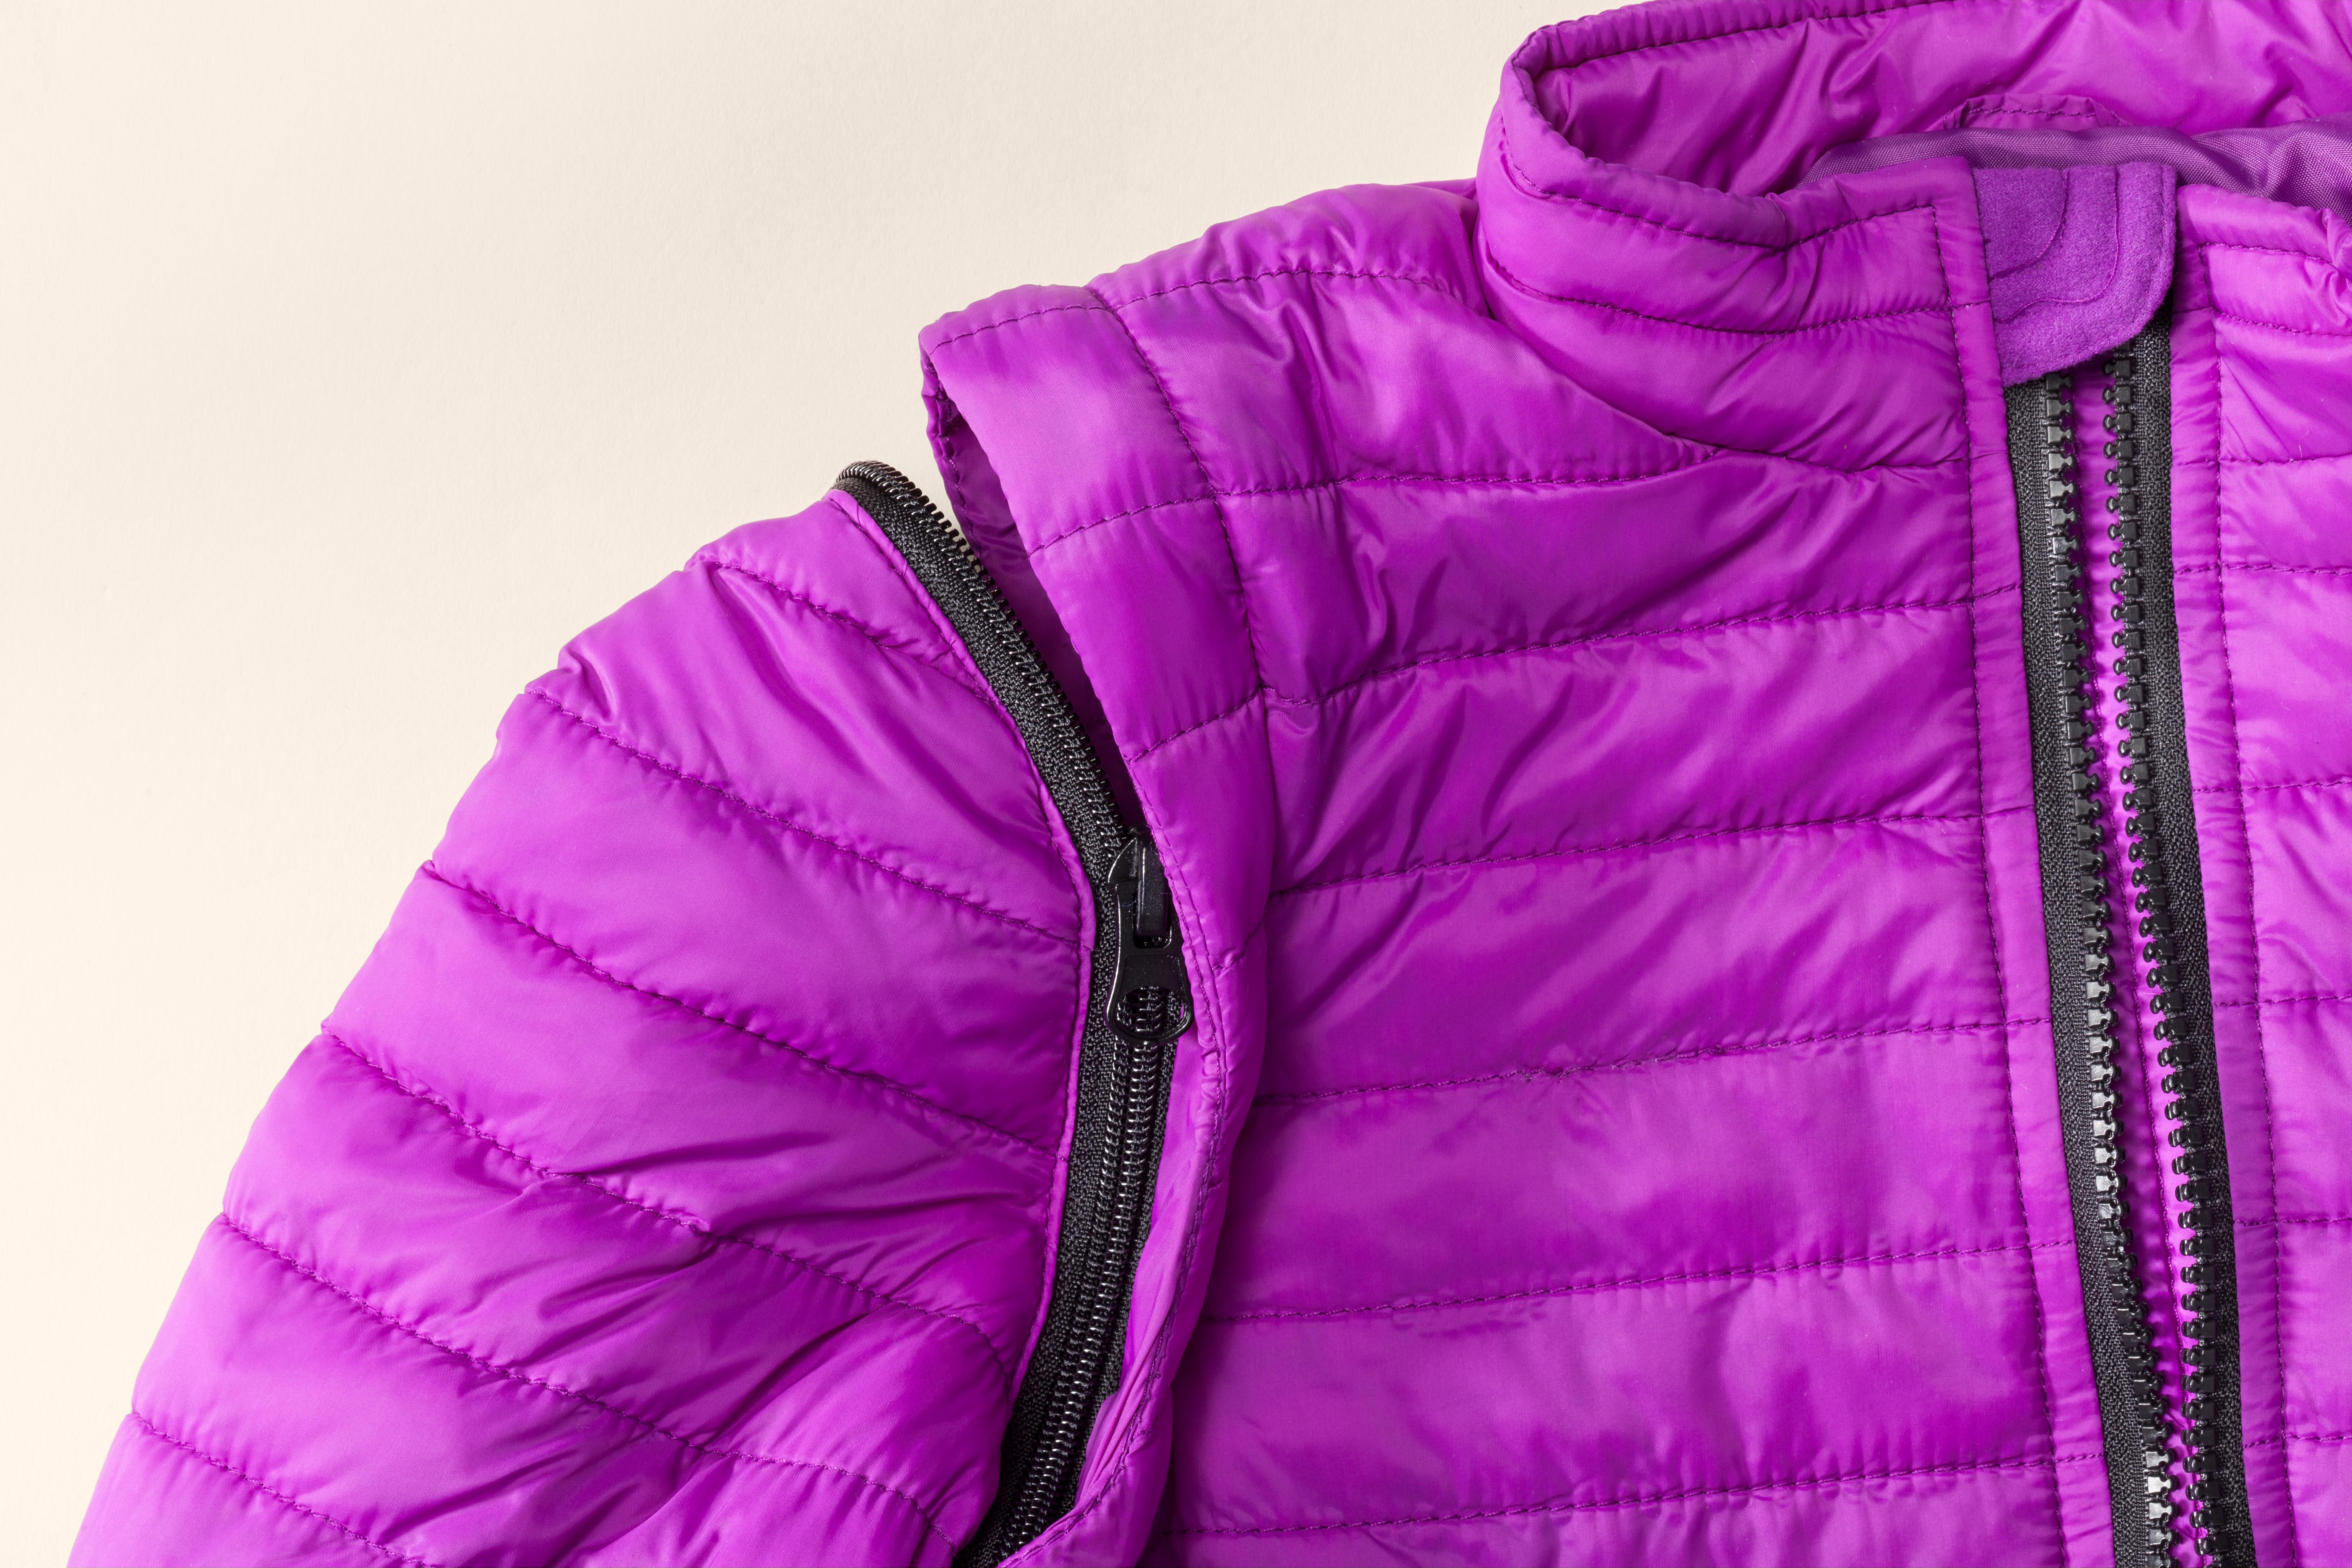 Fashion beyond Function panel. A bright purple child's winter jacket. With velcro sides on a white background.